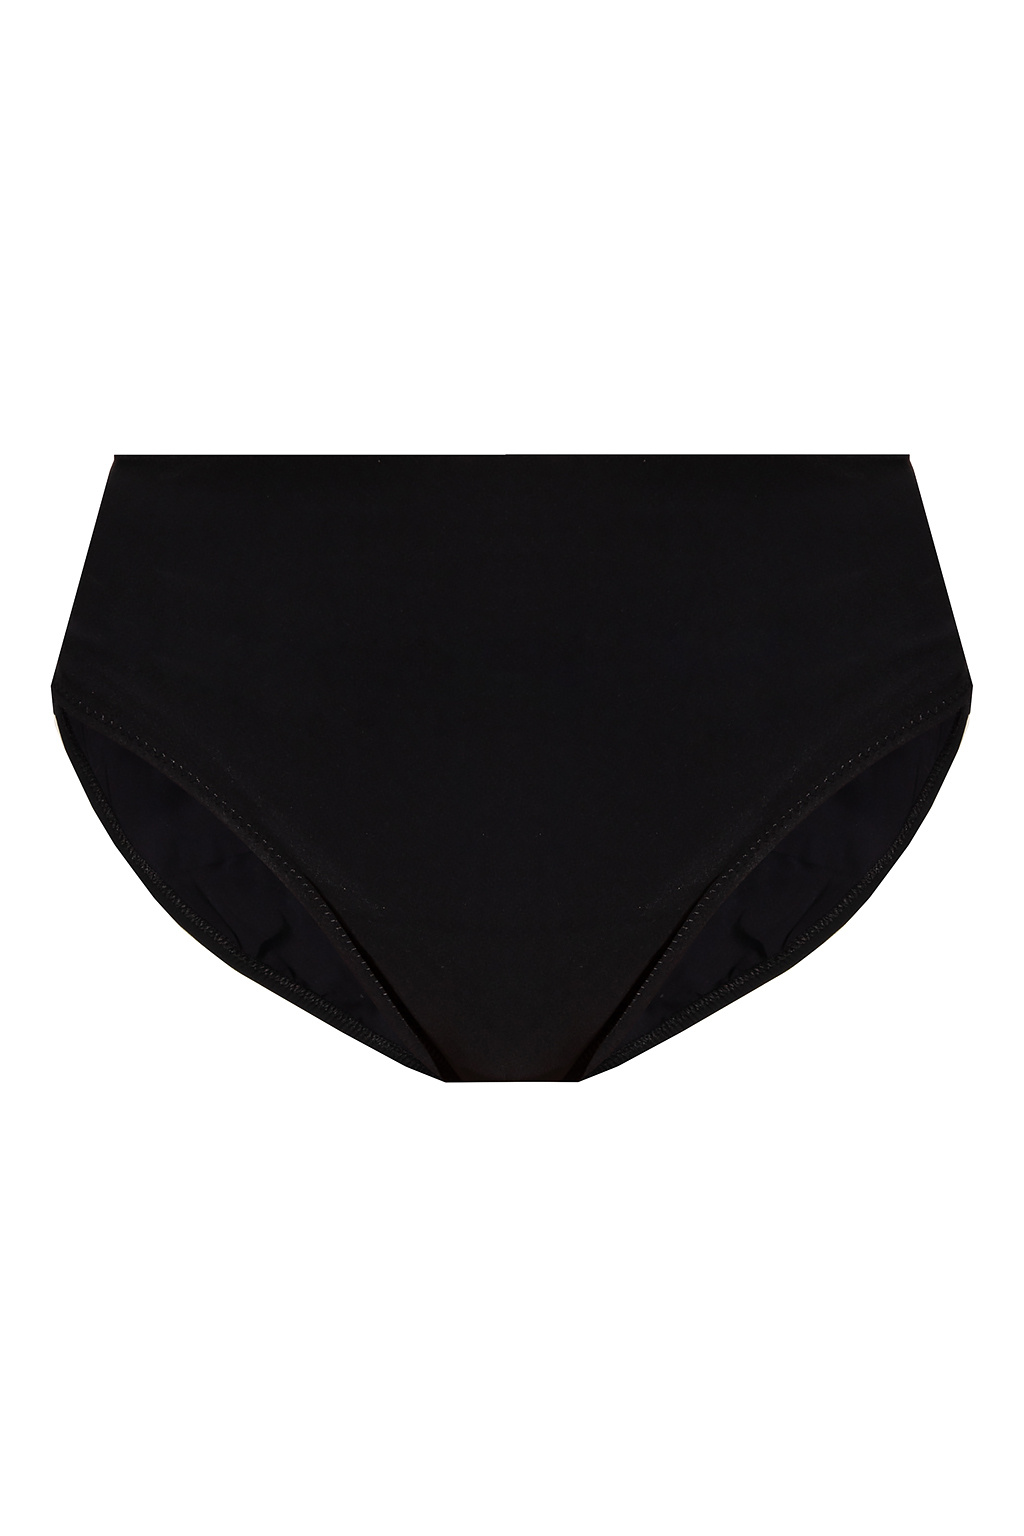 Add to bag Swimsuit bottom